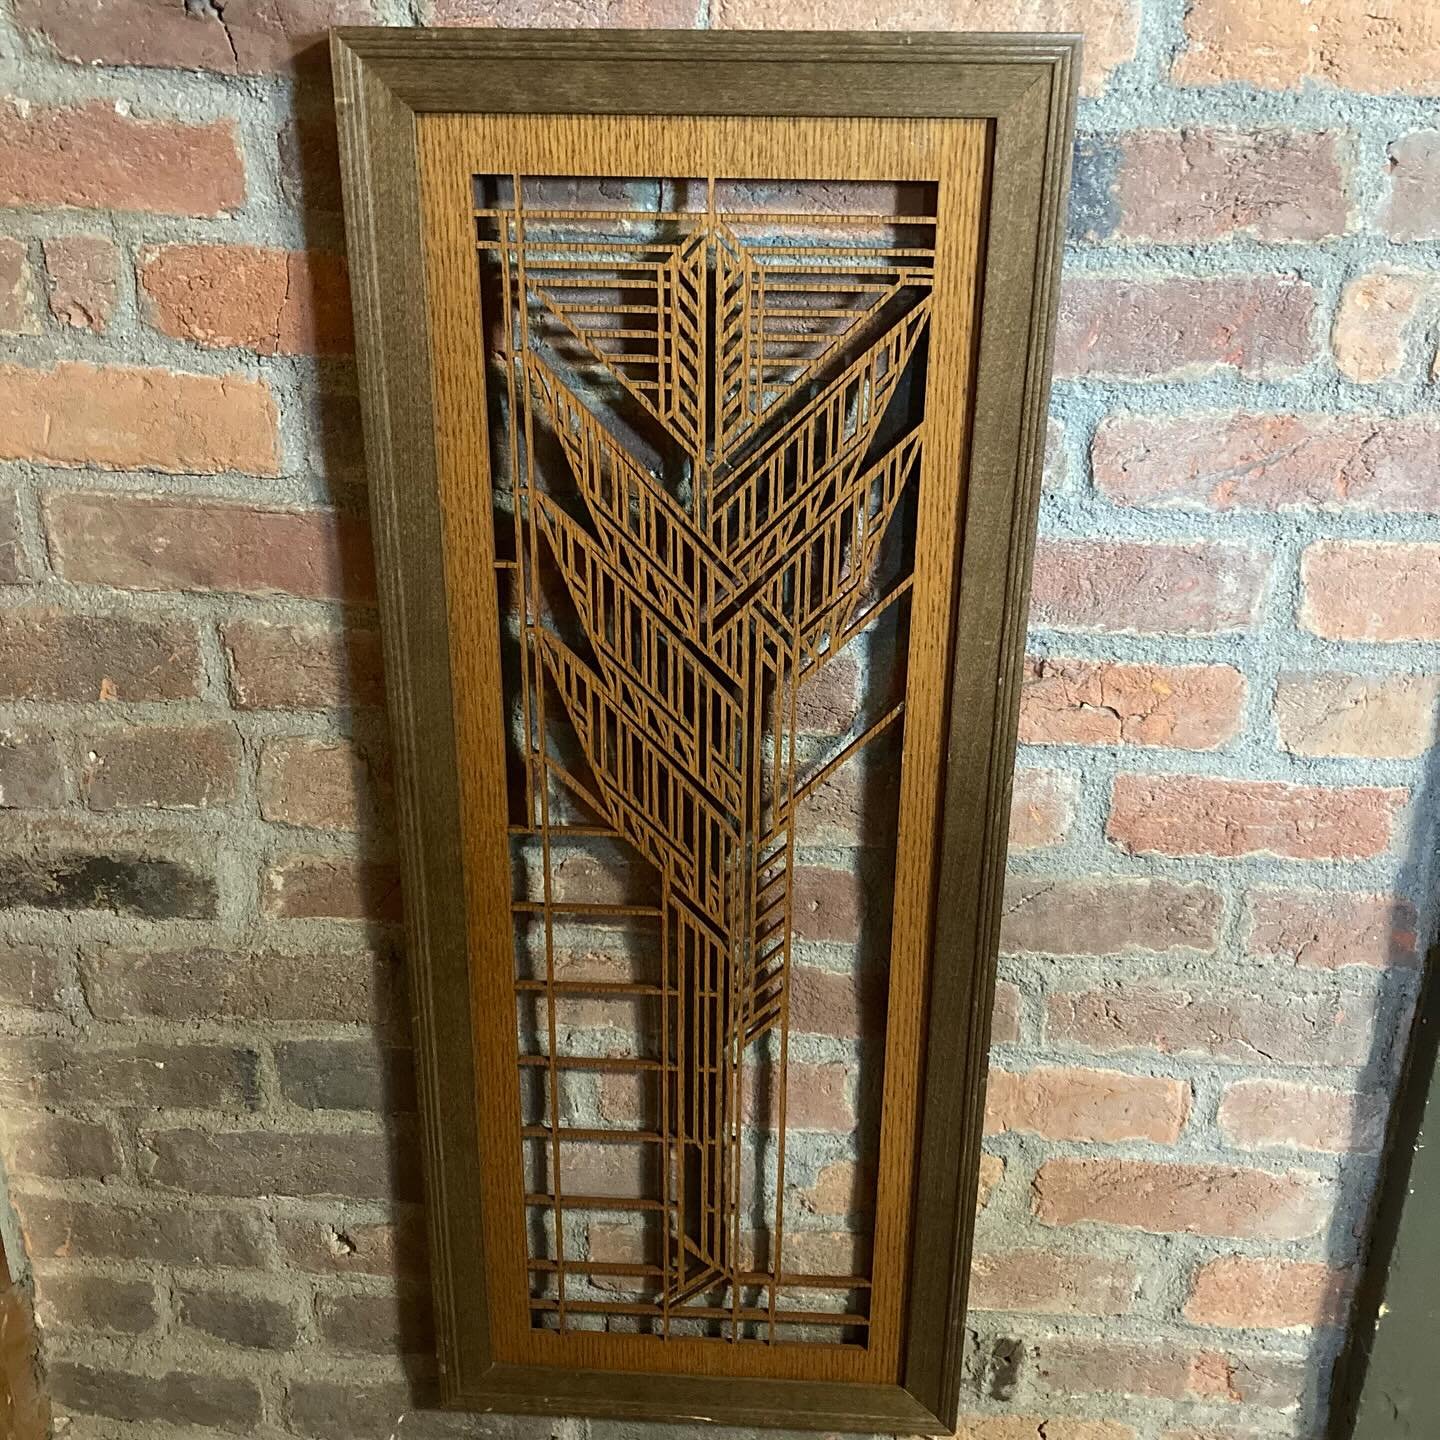 When you&rsquo;re Wright, you&rsquo;re right.  Check out one of our latest finds: a Frank Lloyd Wright Dana Sumac hardwood art screen wall panel. Measuring 31.5&rdquo; x 11.5&rdquo; x .5.&rdquo; It is laser-cut and comes with a cherry veneer finish. 